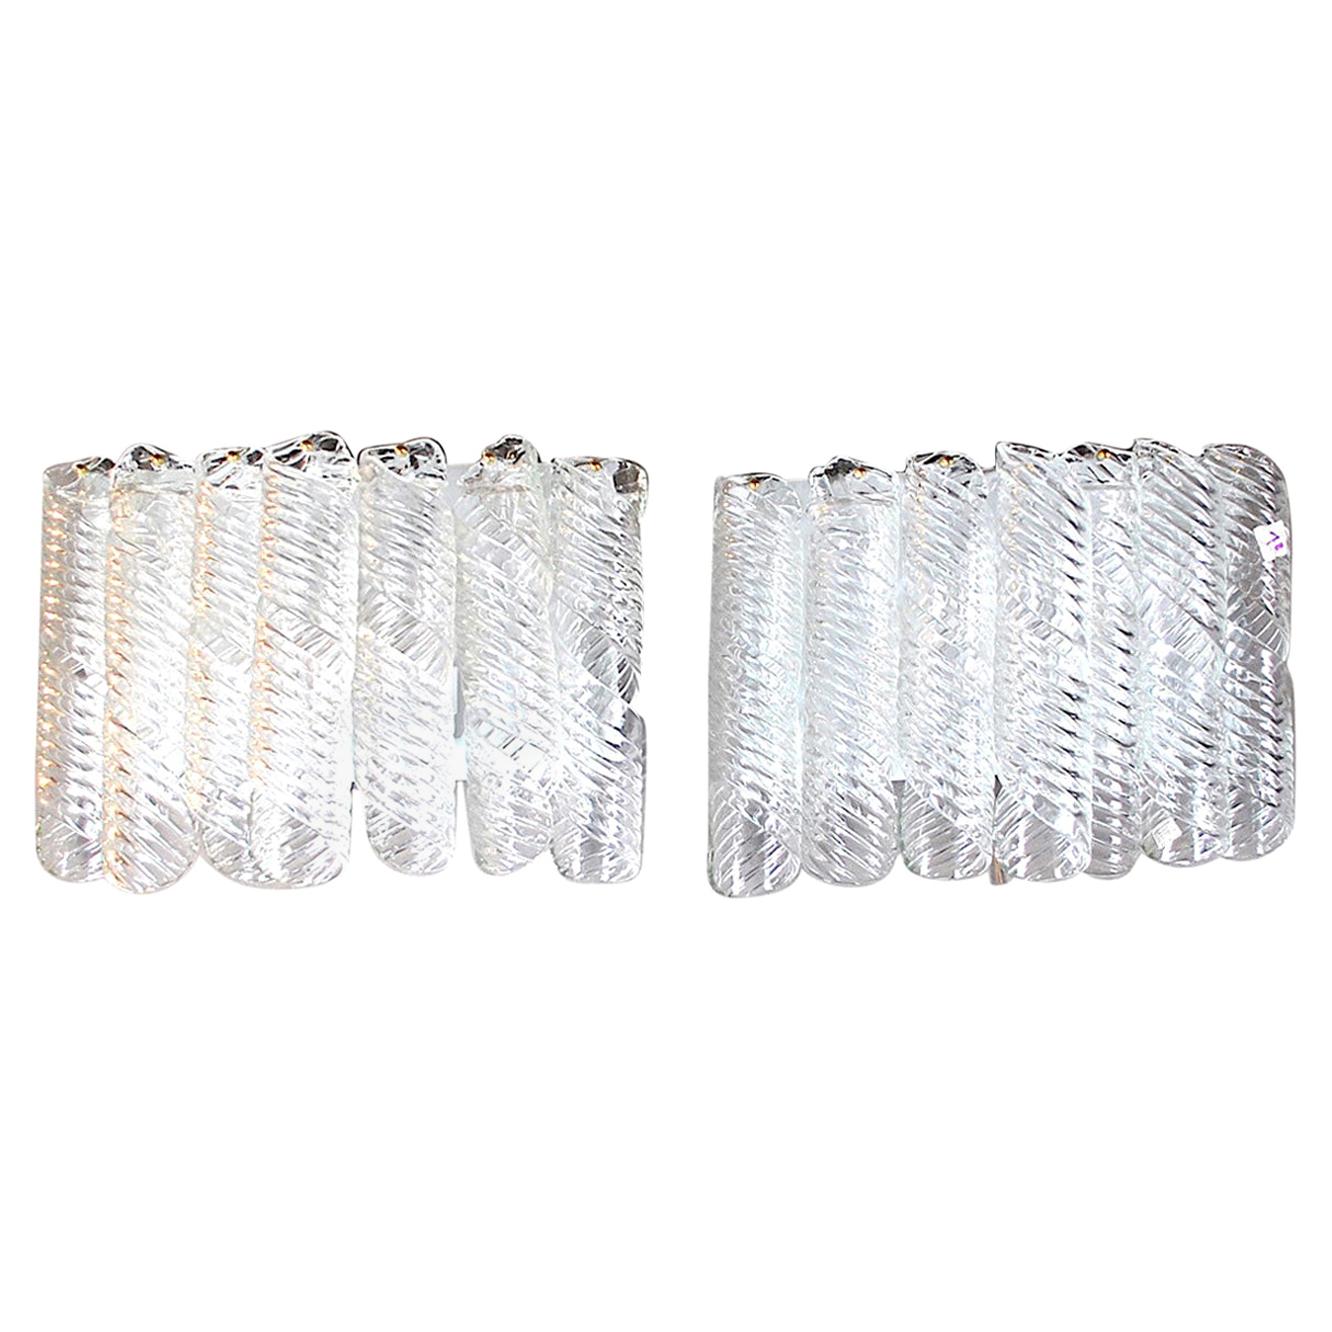 Mazzega Italian Spiral Pair of Sconces in Murano Glass For Sale